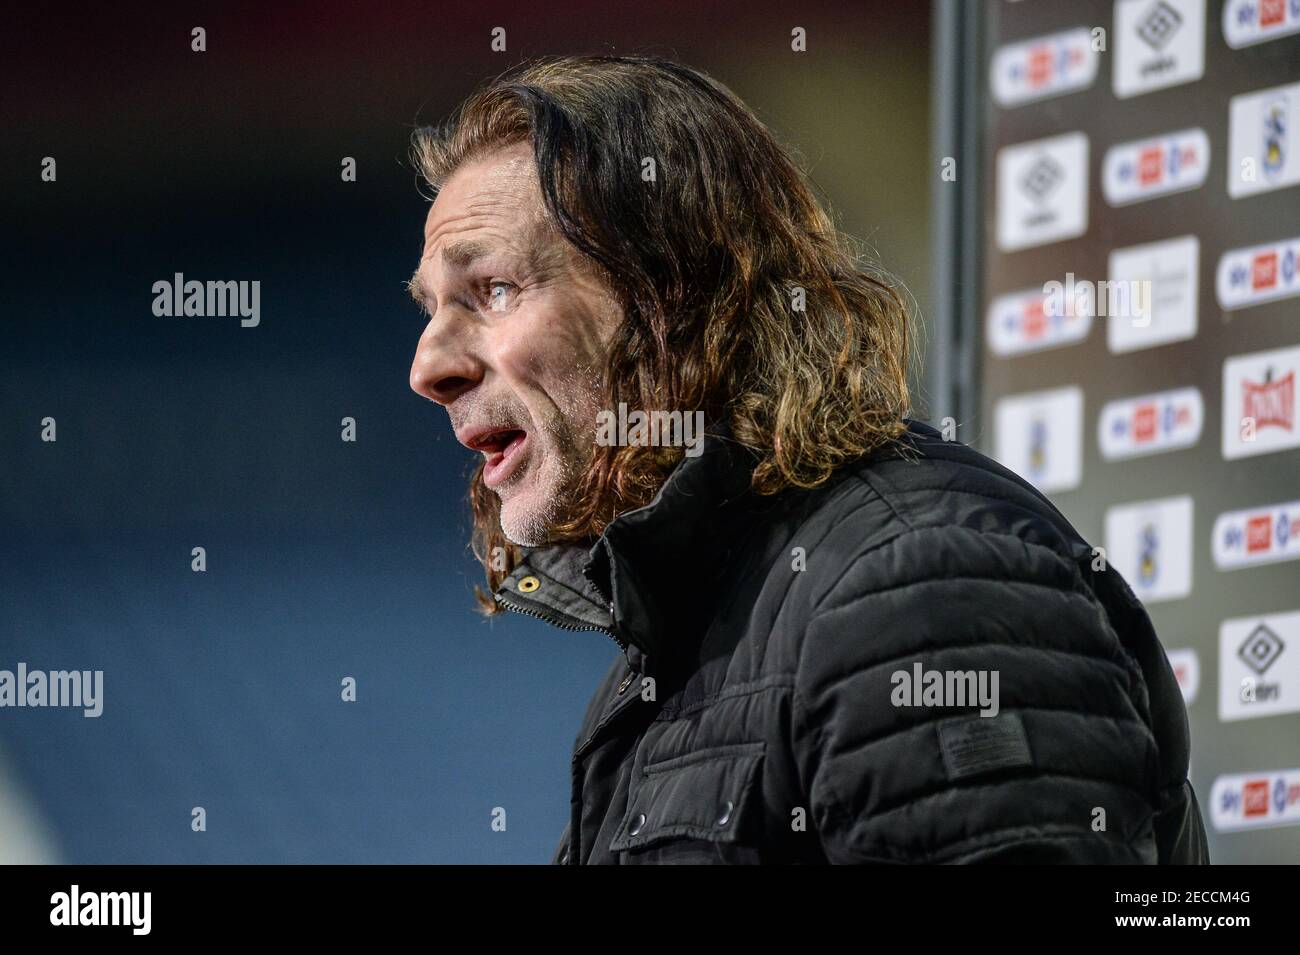 Huddersfield, UK. 13th Feb, 2021. Gareth Ainsworth manager of Wycombe Wanderers talks to the media in Huddersfield, UK on 2/13/2021. (Photo by Dean Williams/News Images/Sipa USA) Credit: Sipa USA/Alamy Live News Stock Photo